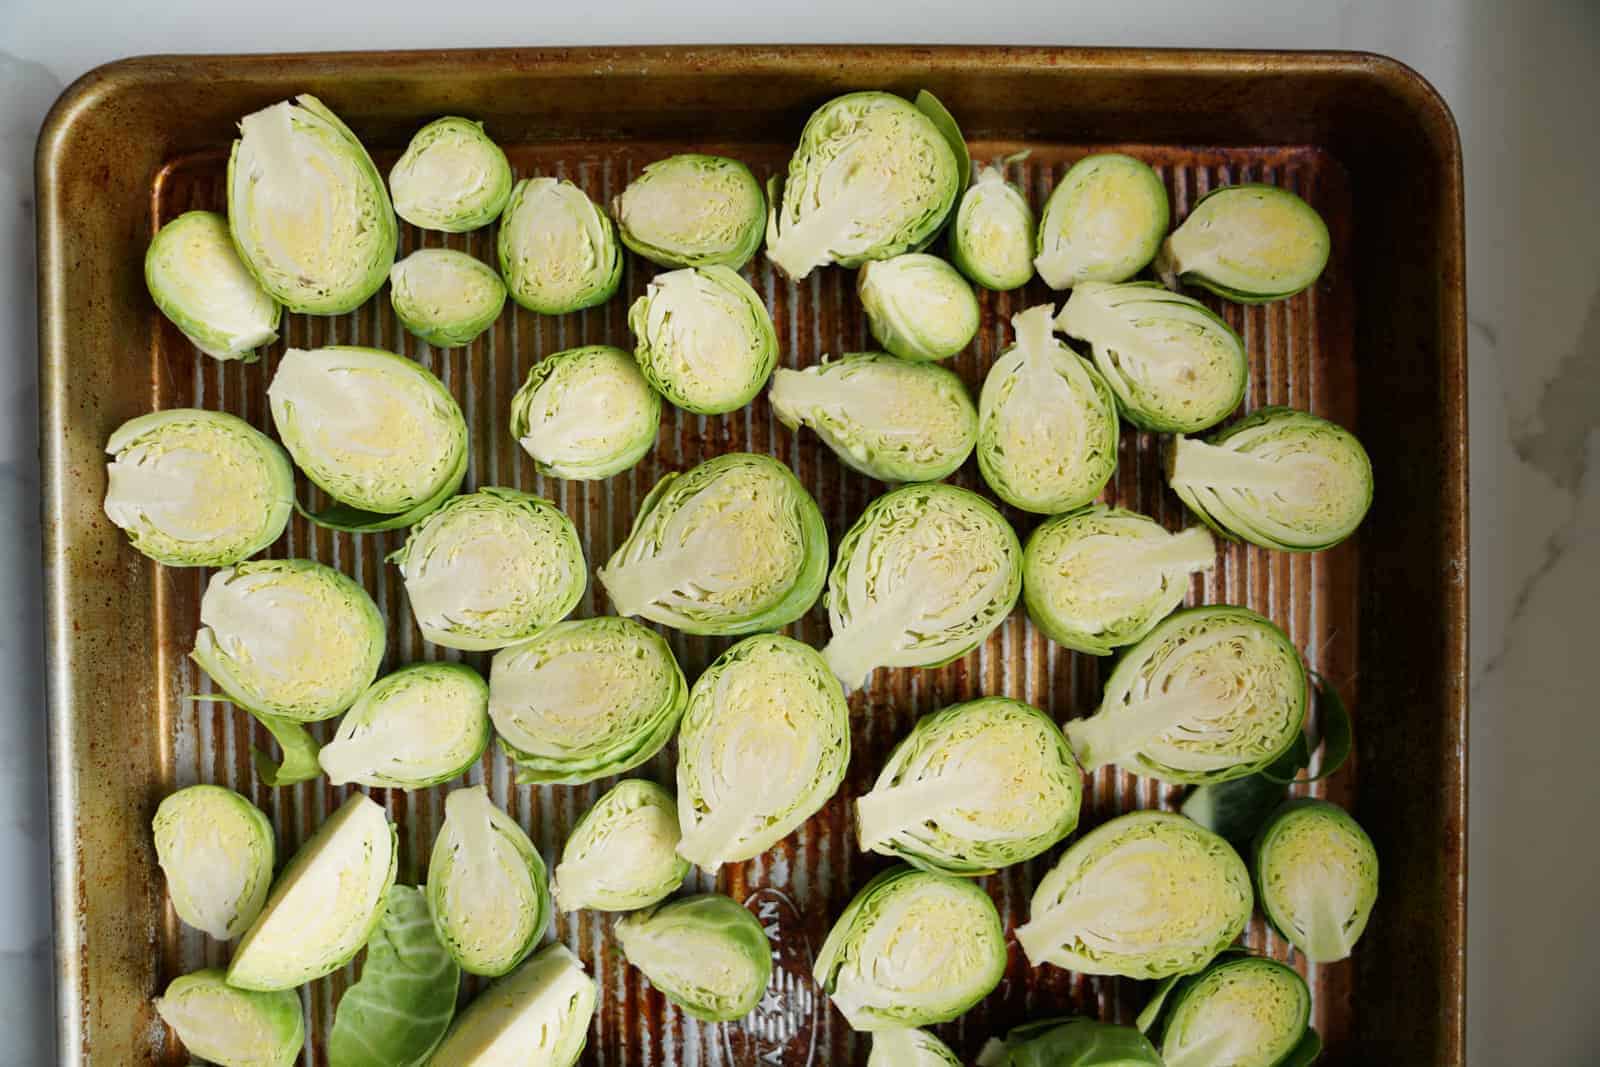 Raw brussel sprouts laying on pan ready to bake.